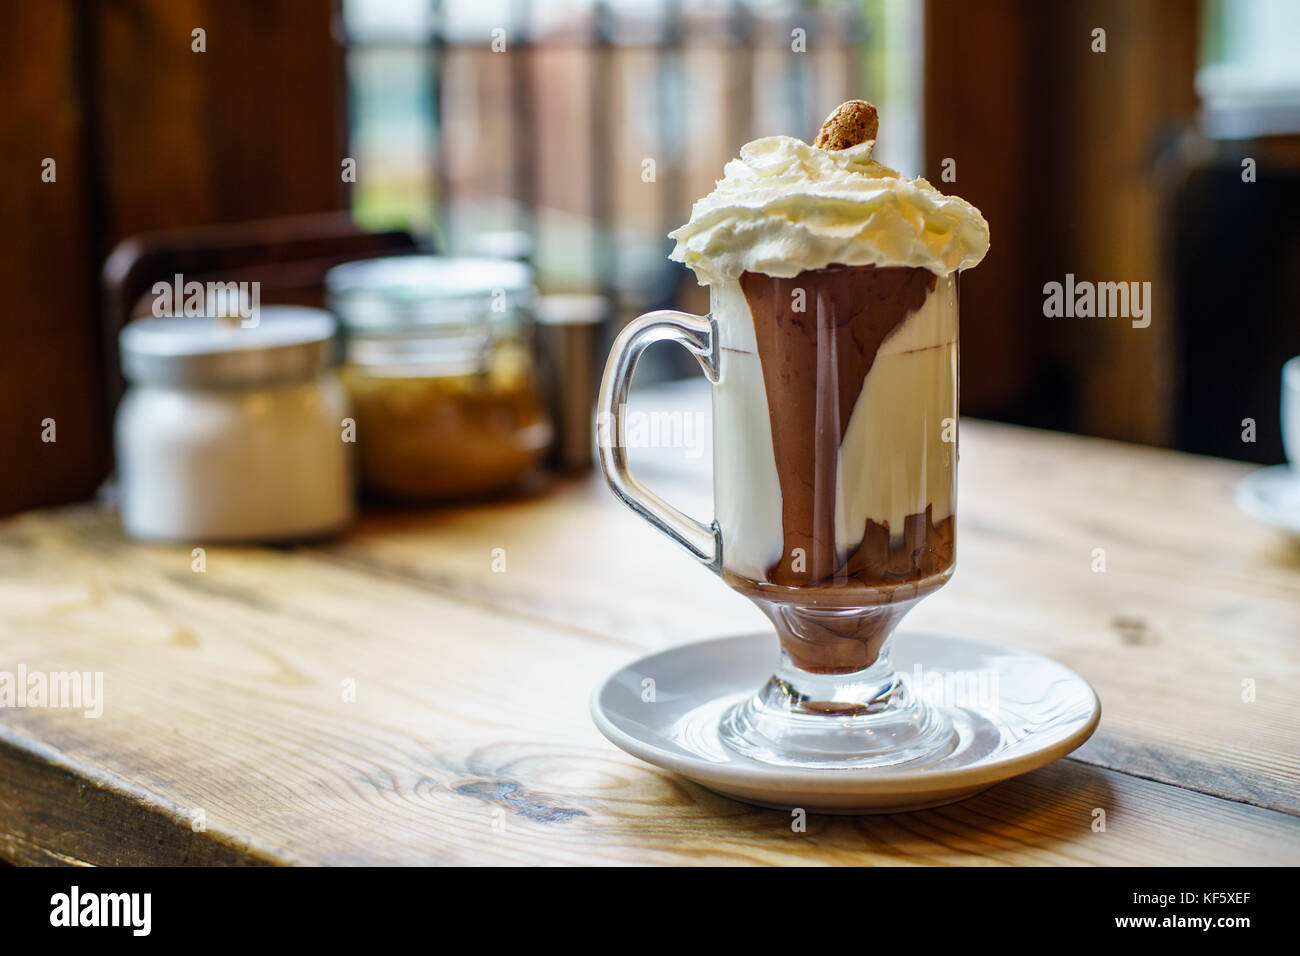 Coffee Mocca made by Nutella, Espresso and milk Stock Photo - Alamy